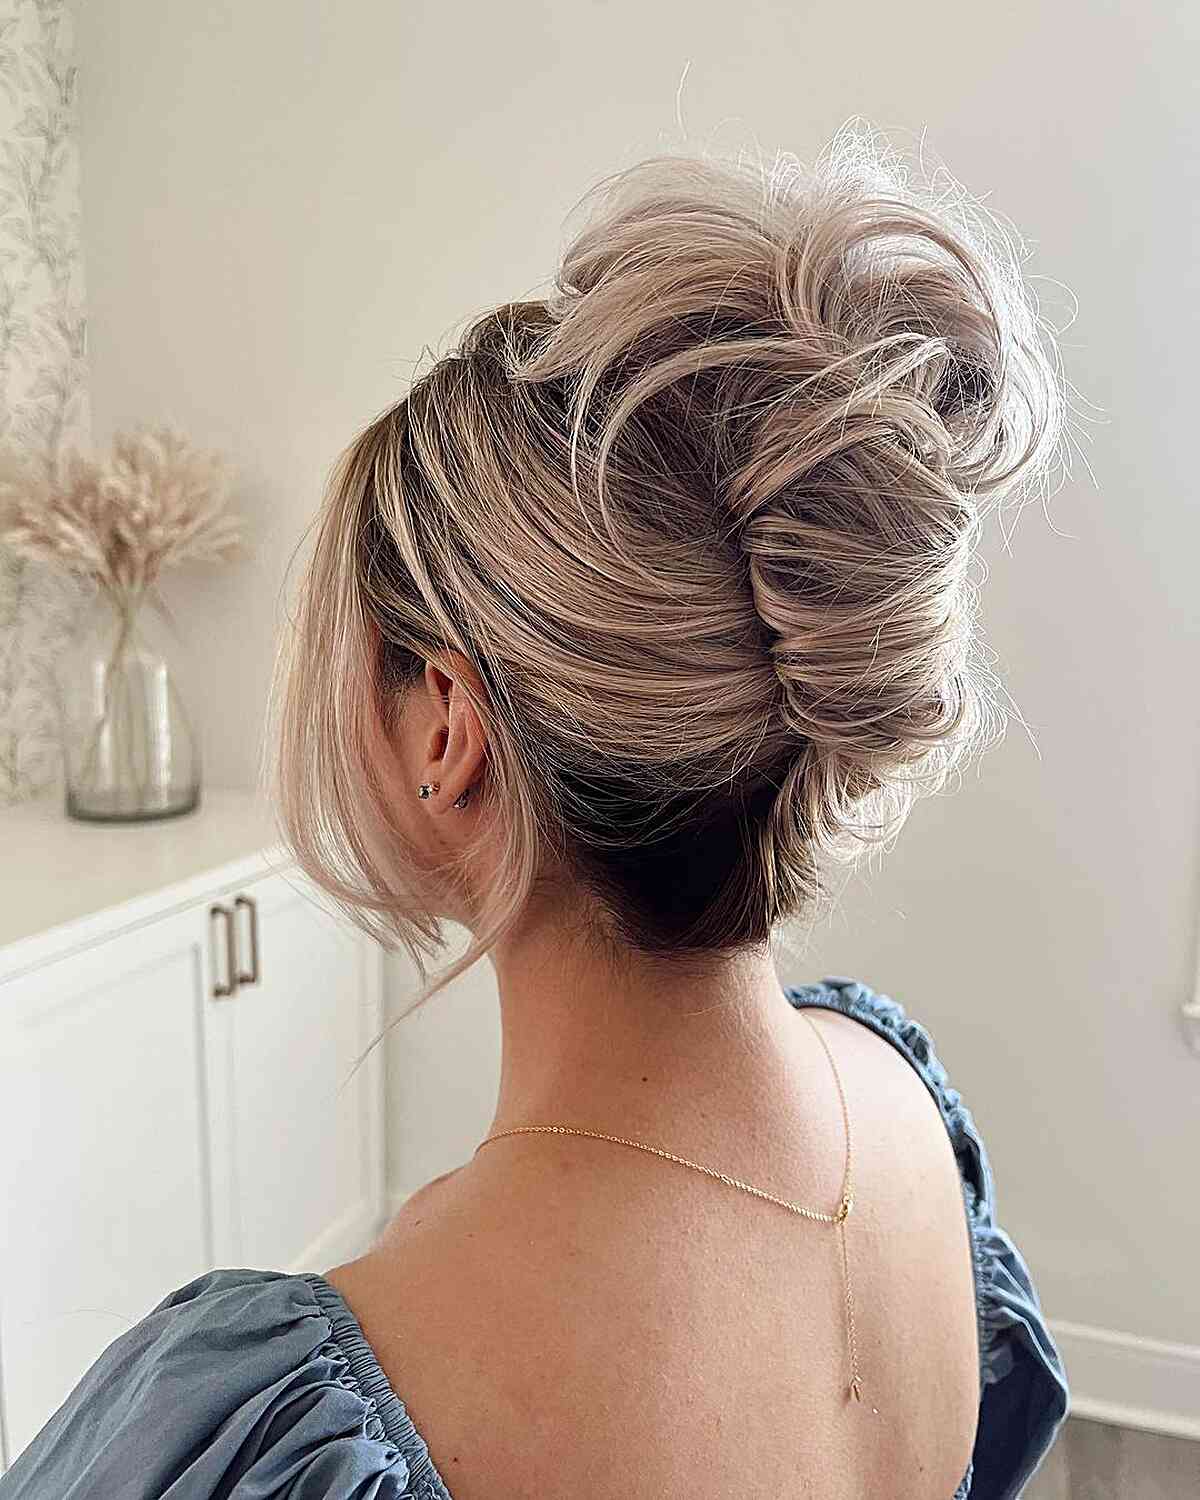 Undone Done, Casual Updo for Weddings